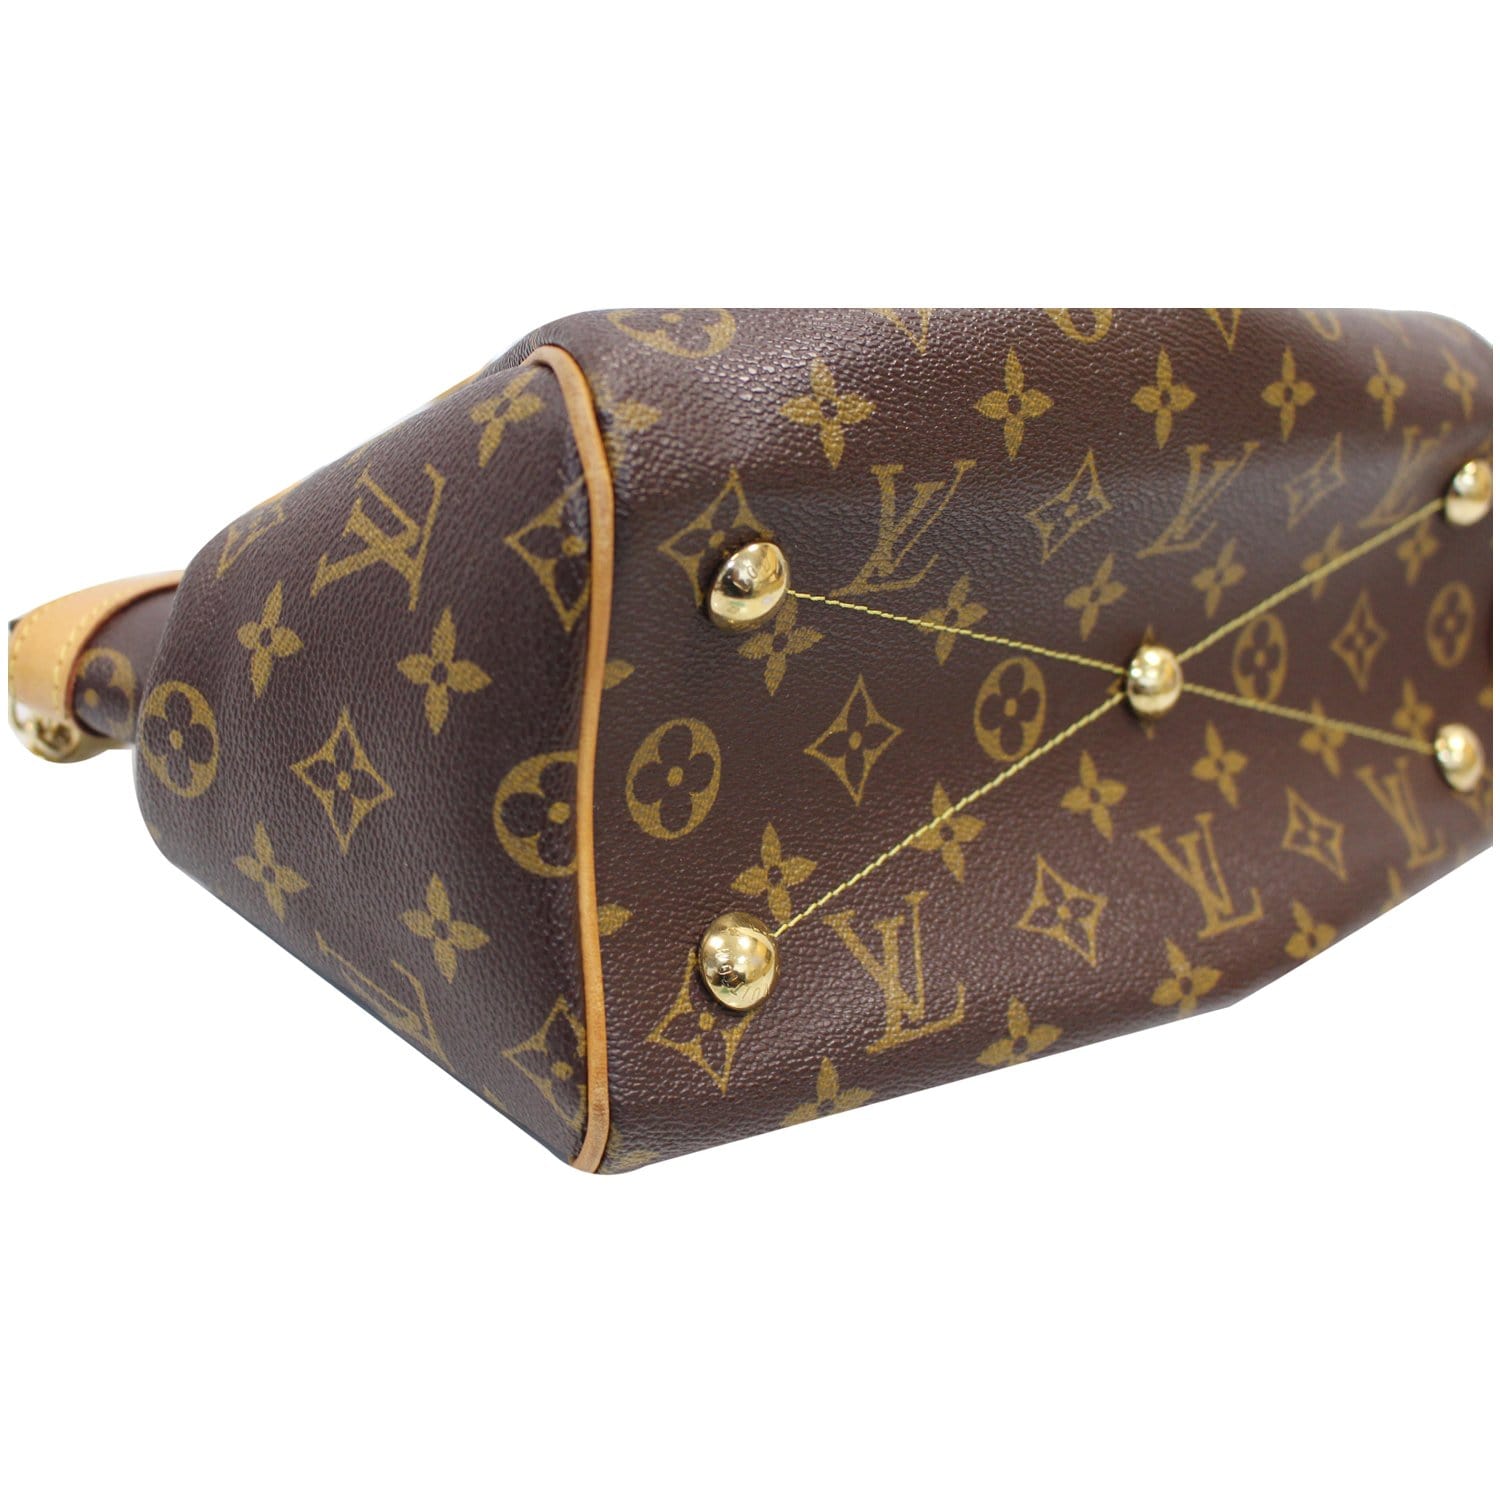 Louis Vuitton Tivoli Bag Reference Guide - Spotted Fashion